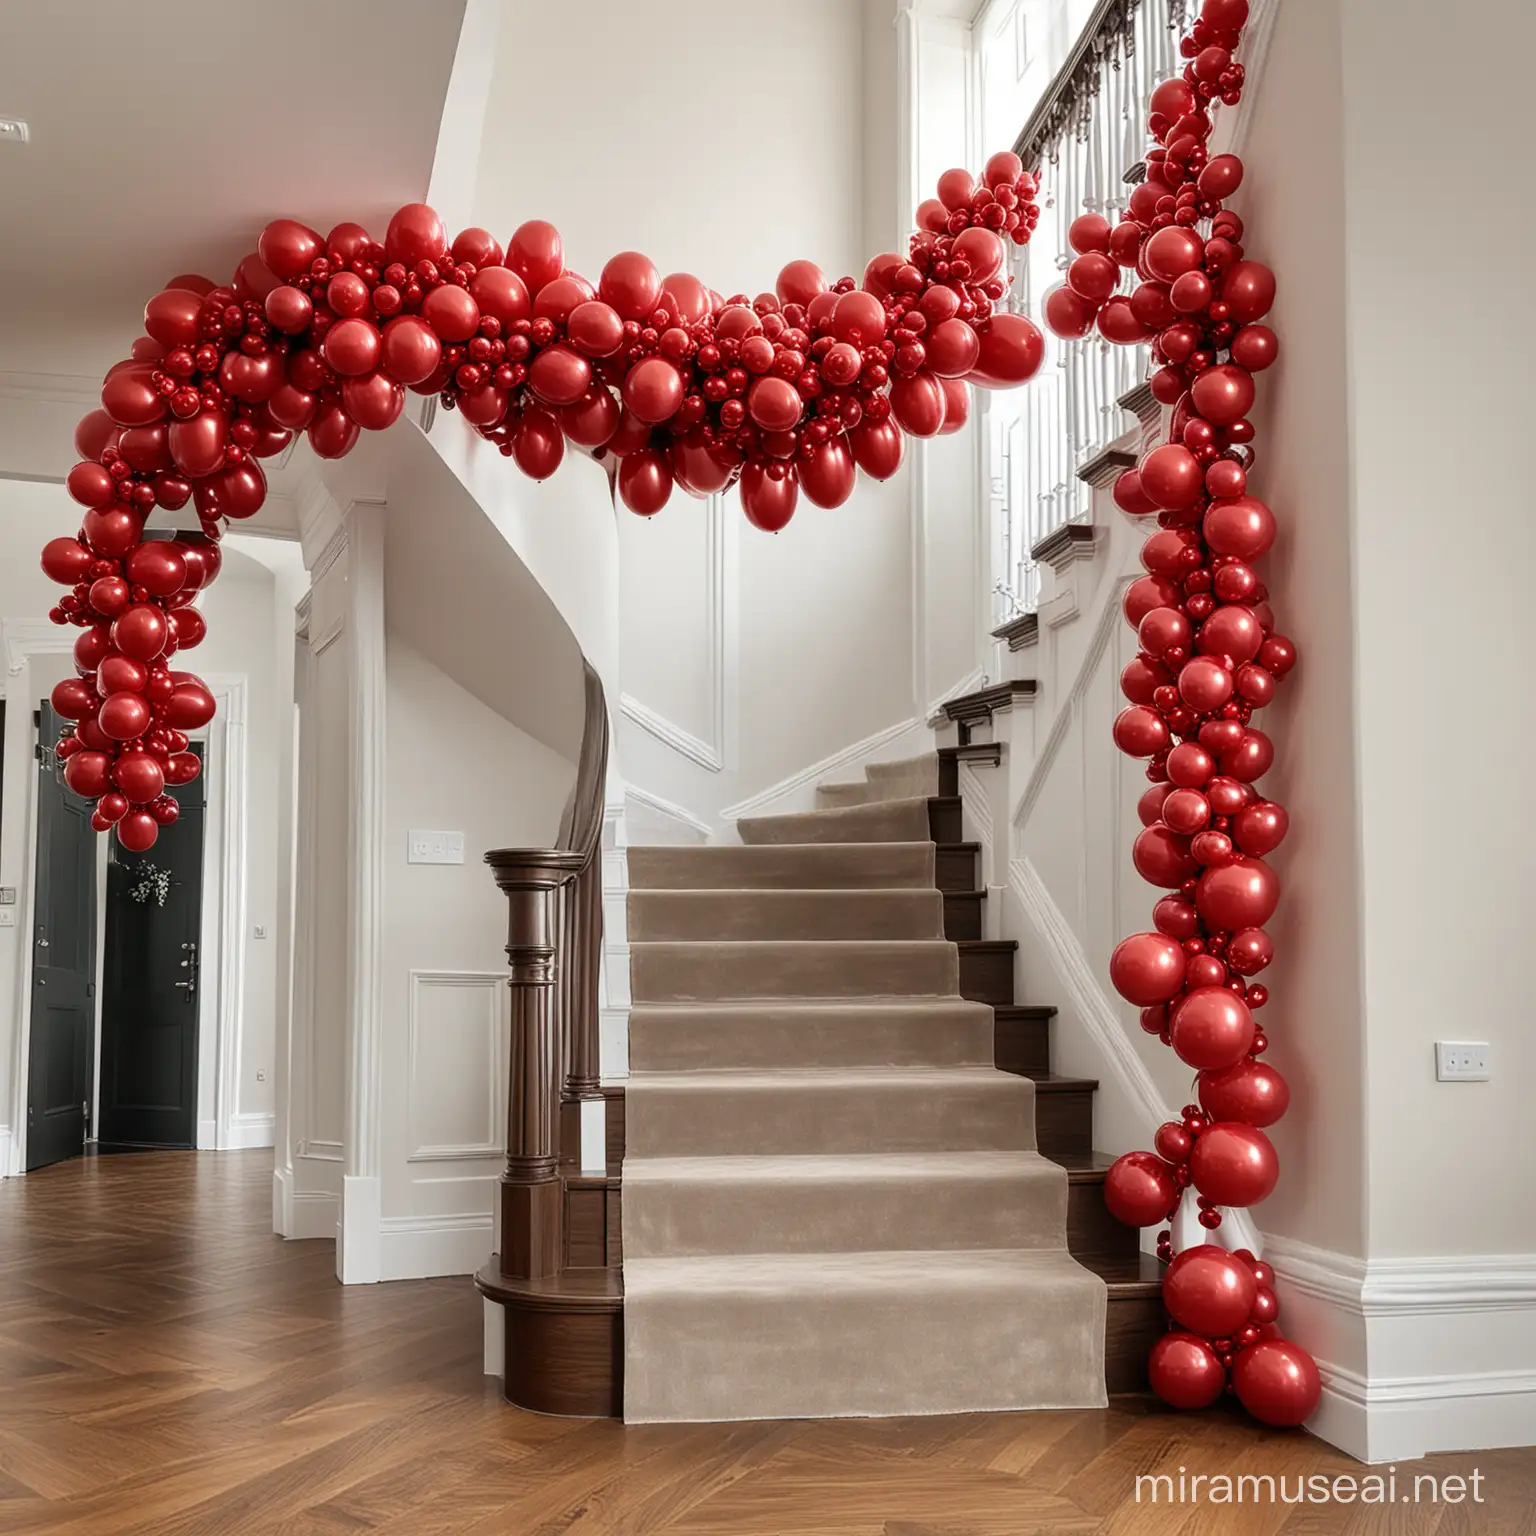 create a realistic photo of a luxury balloon garland with only red balloons with red rose accents on staircase in house